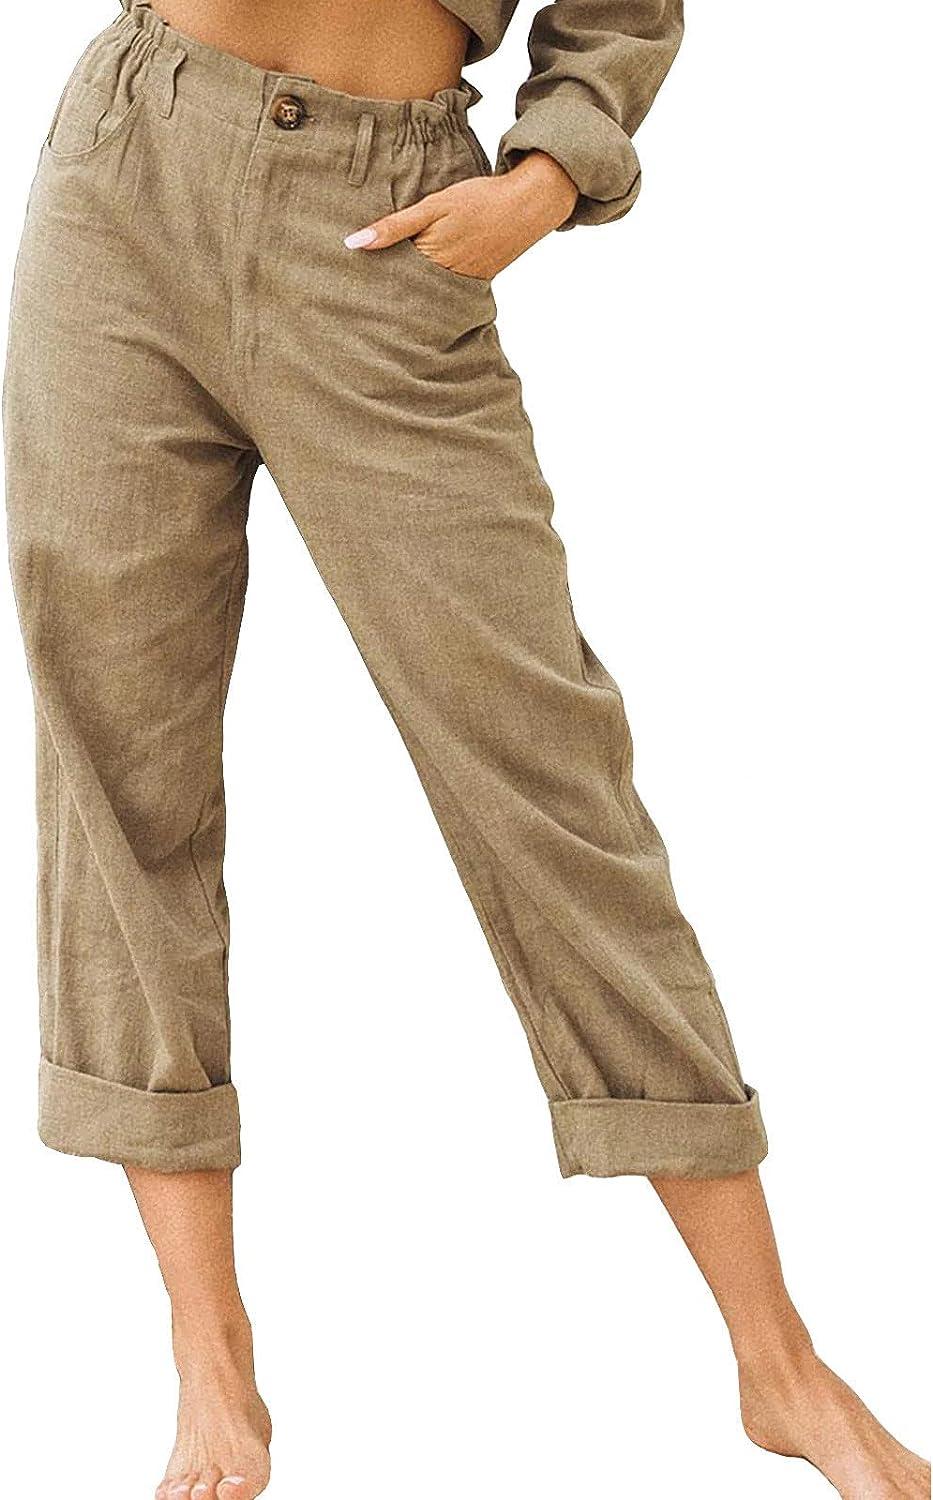 MALAIDOG Womens Cotton Linen Beach Lounge Pants Summer Casual Solid  Slimming Fitted High Waist Wide Leg Trousers with Pockets Khaki Medium